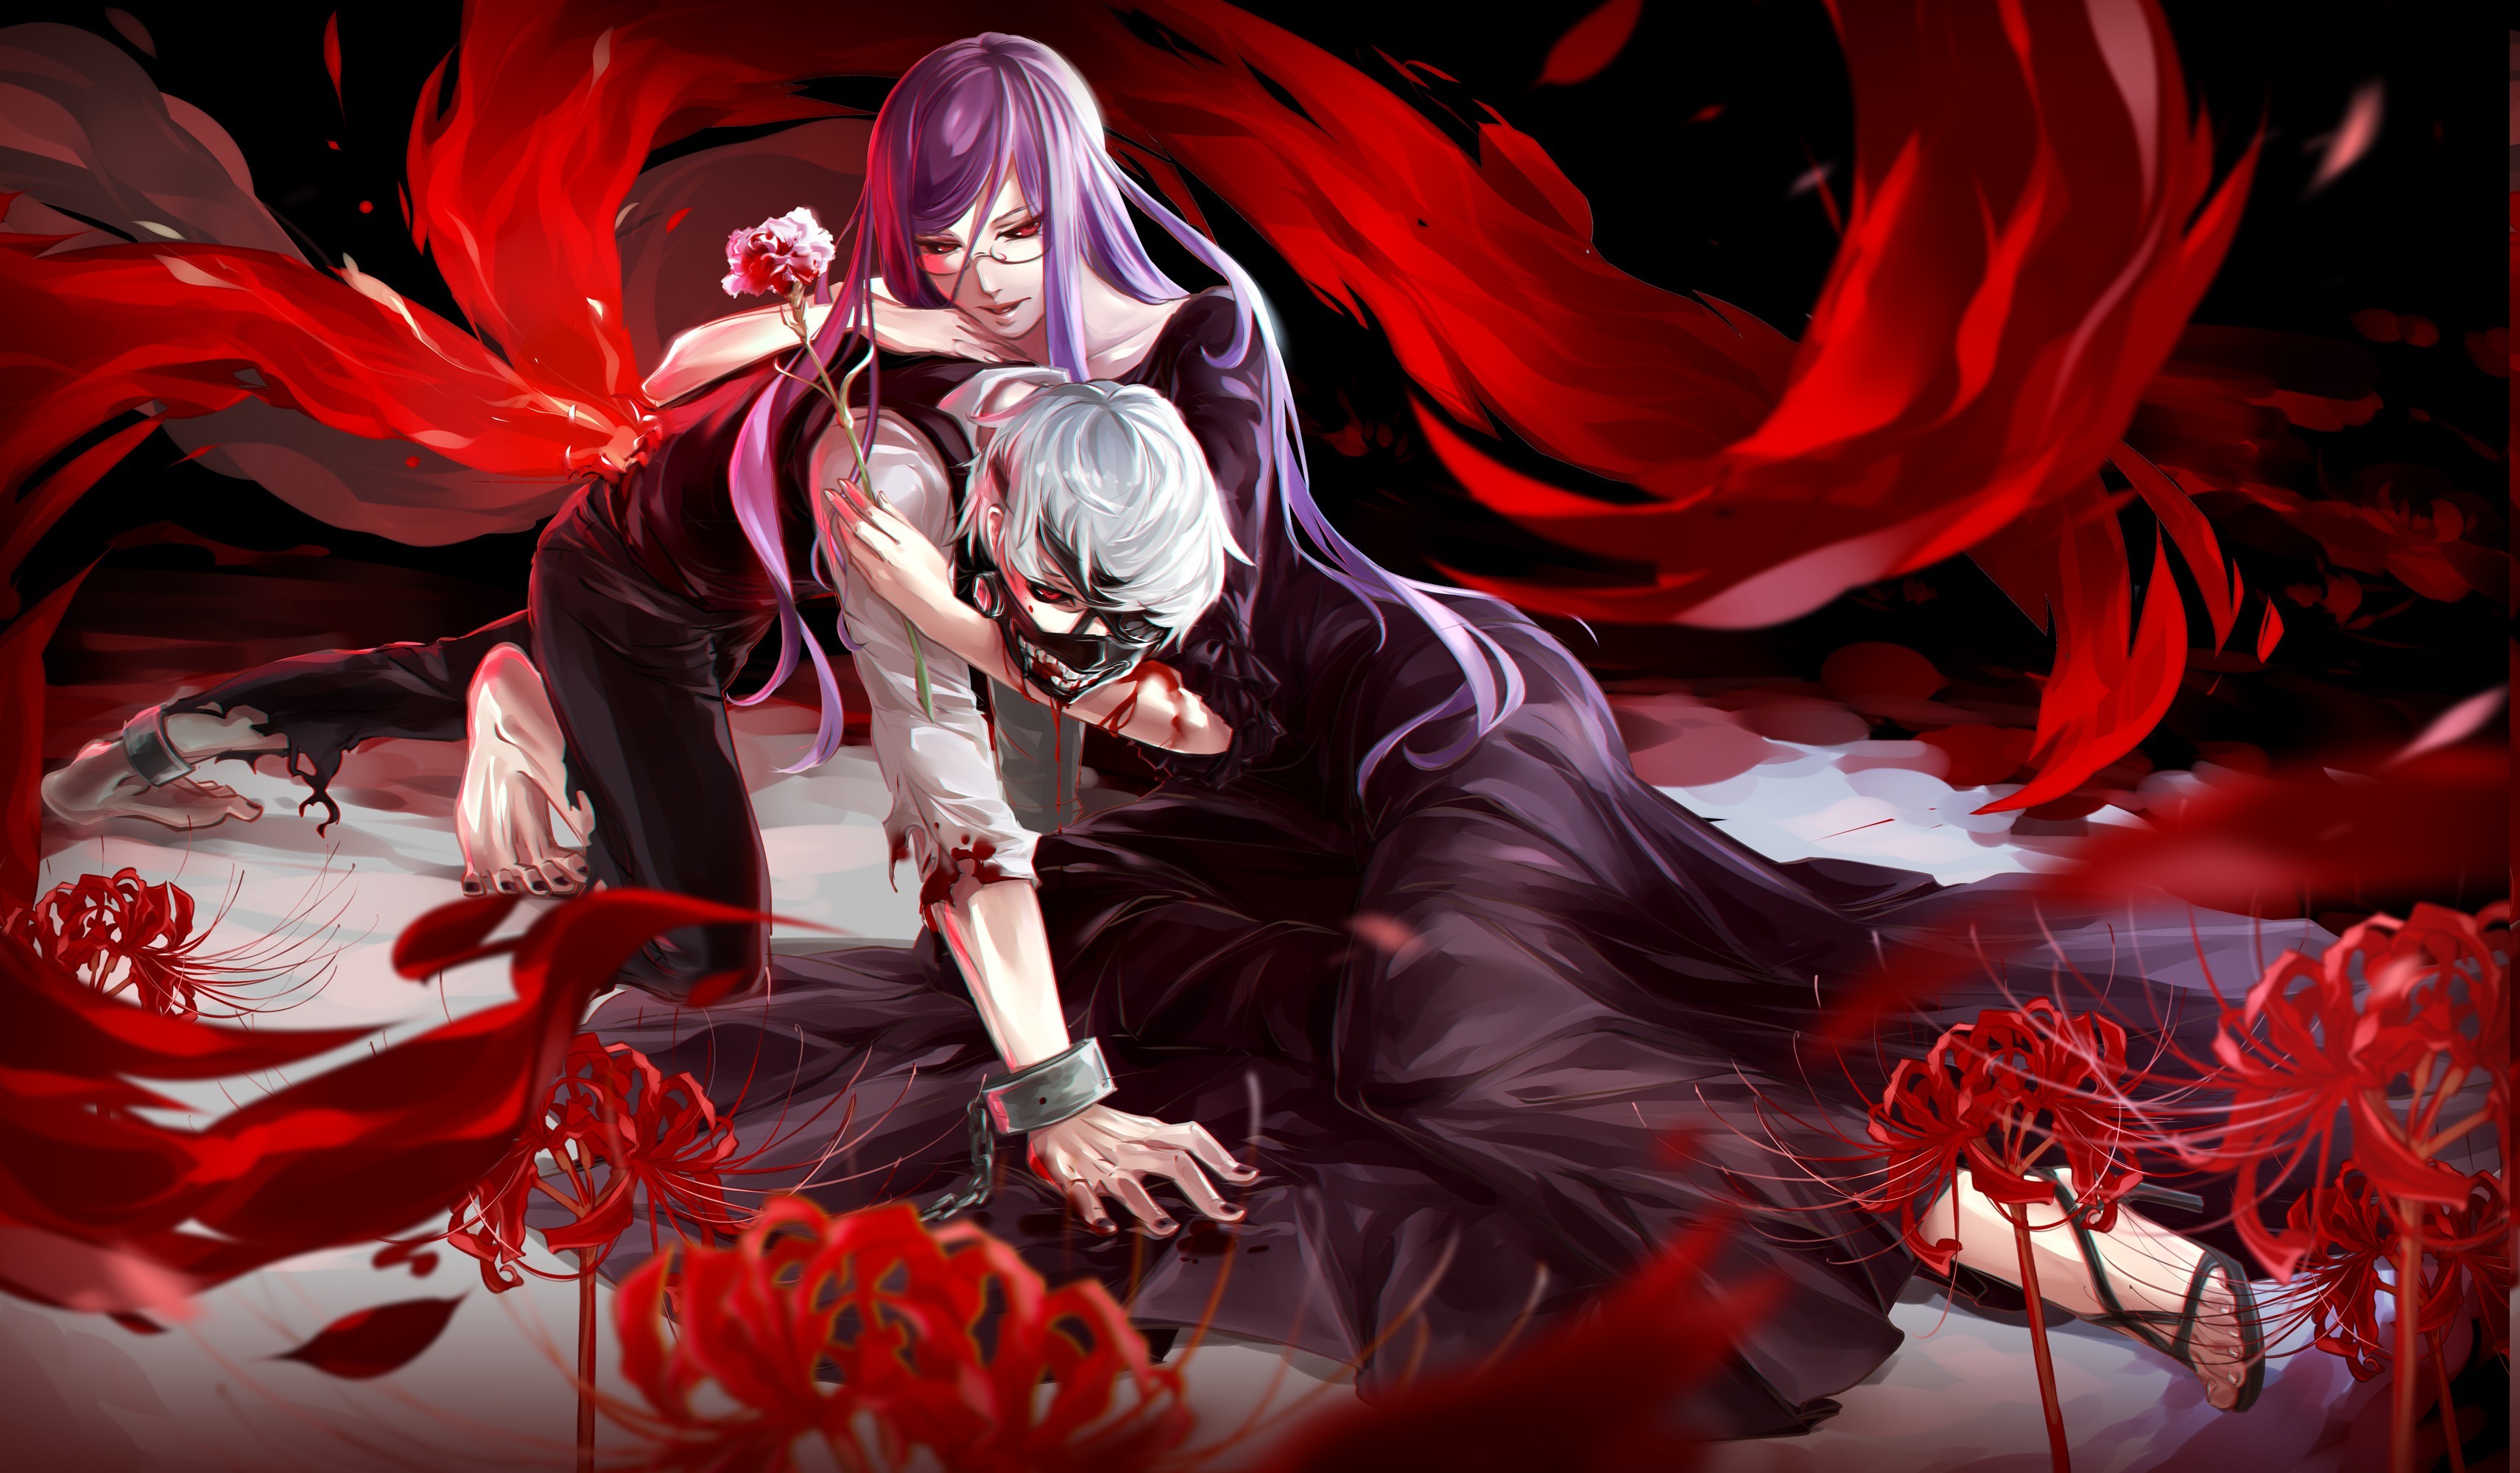 Tokyo Ghoul Android Phone Wallpapers - Wallpaper Cave